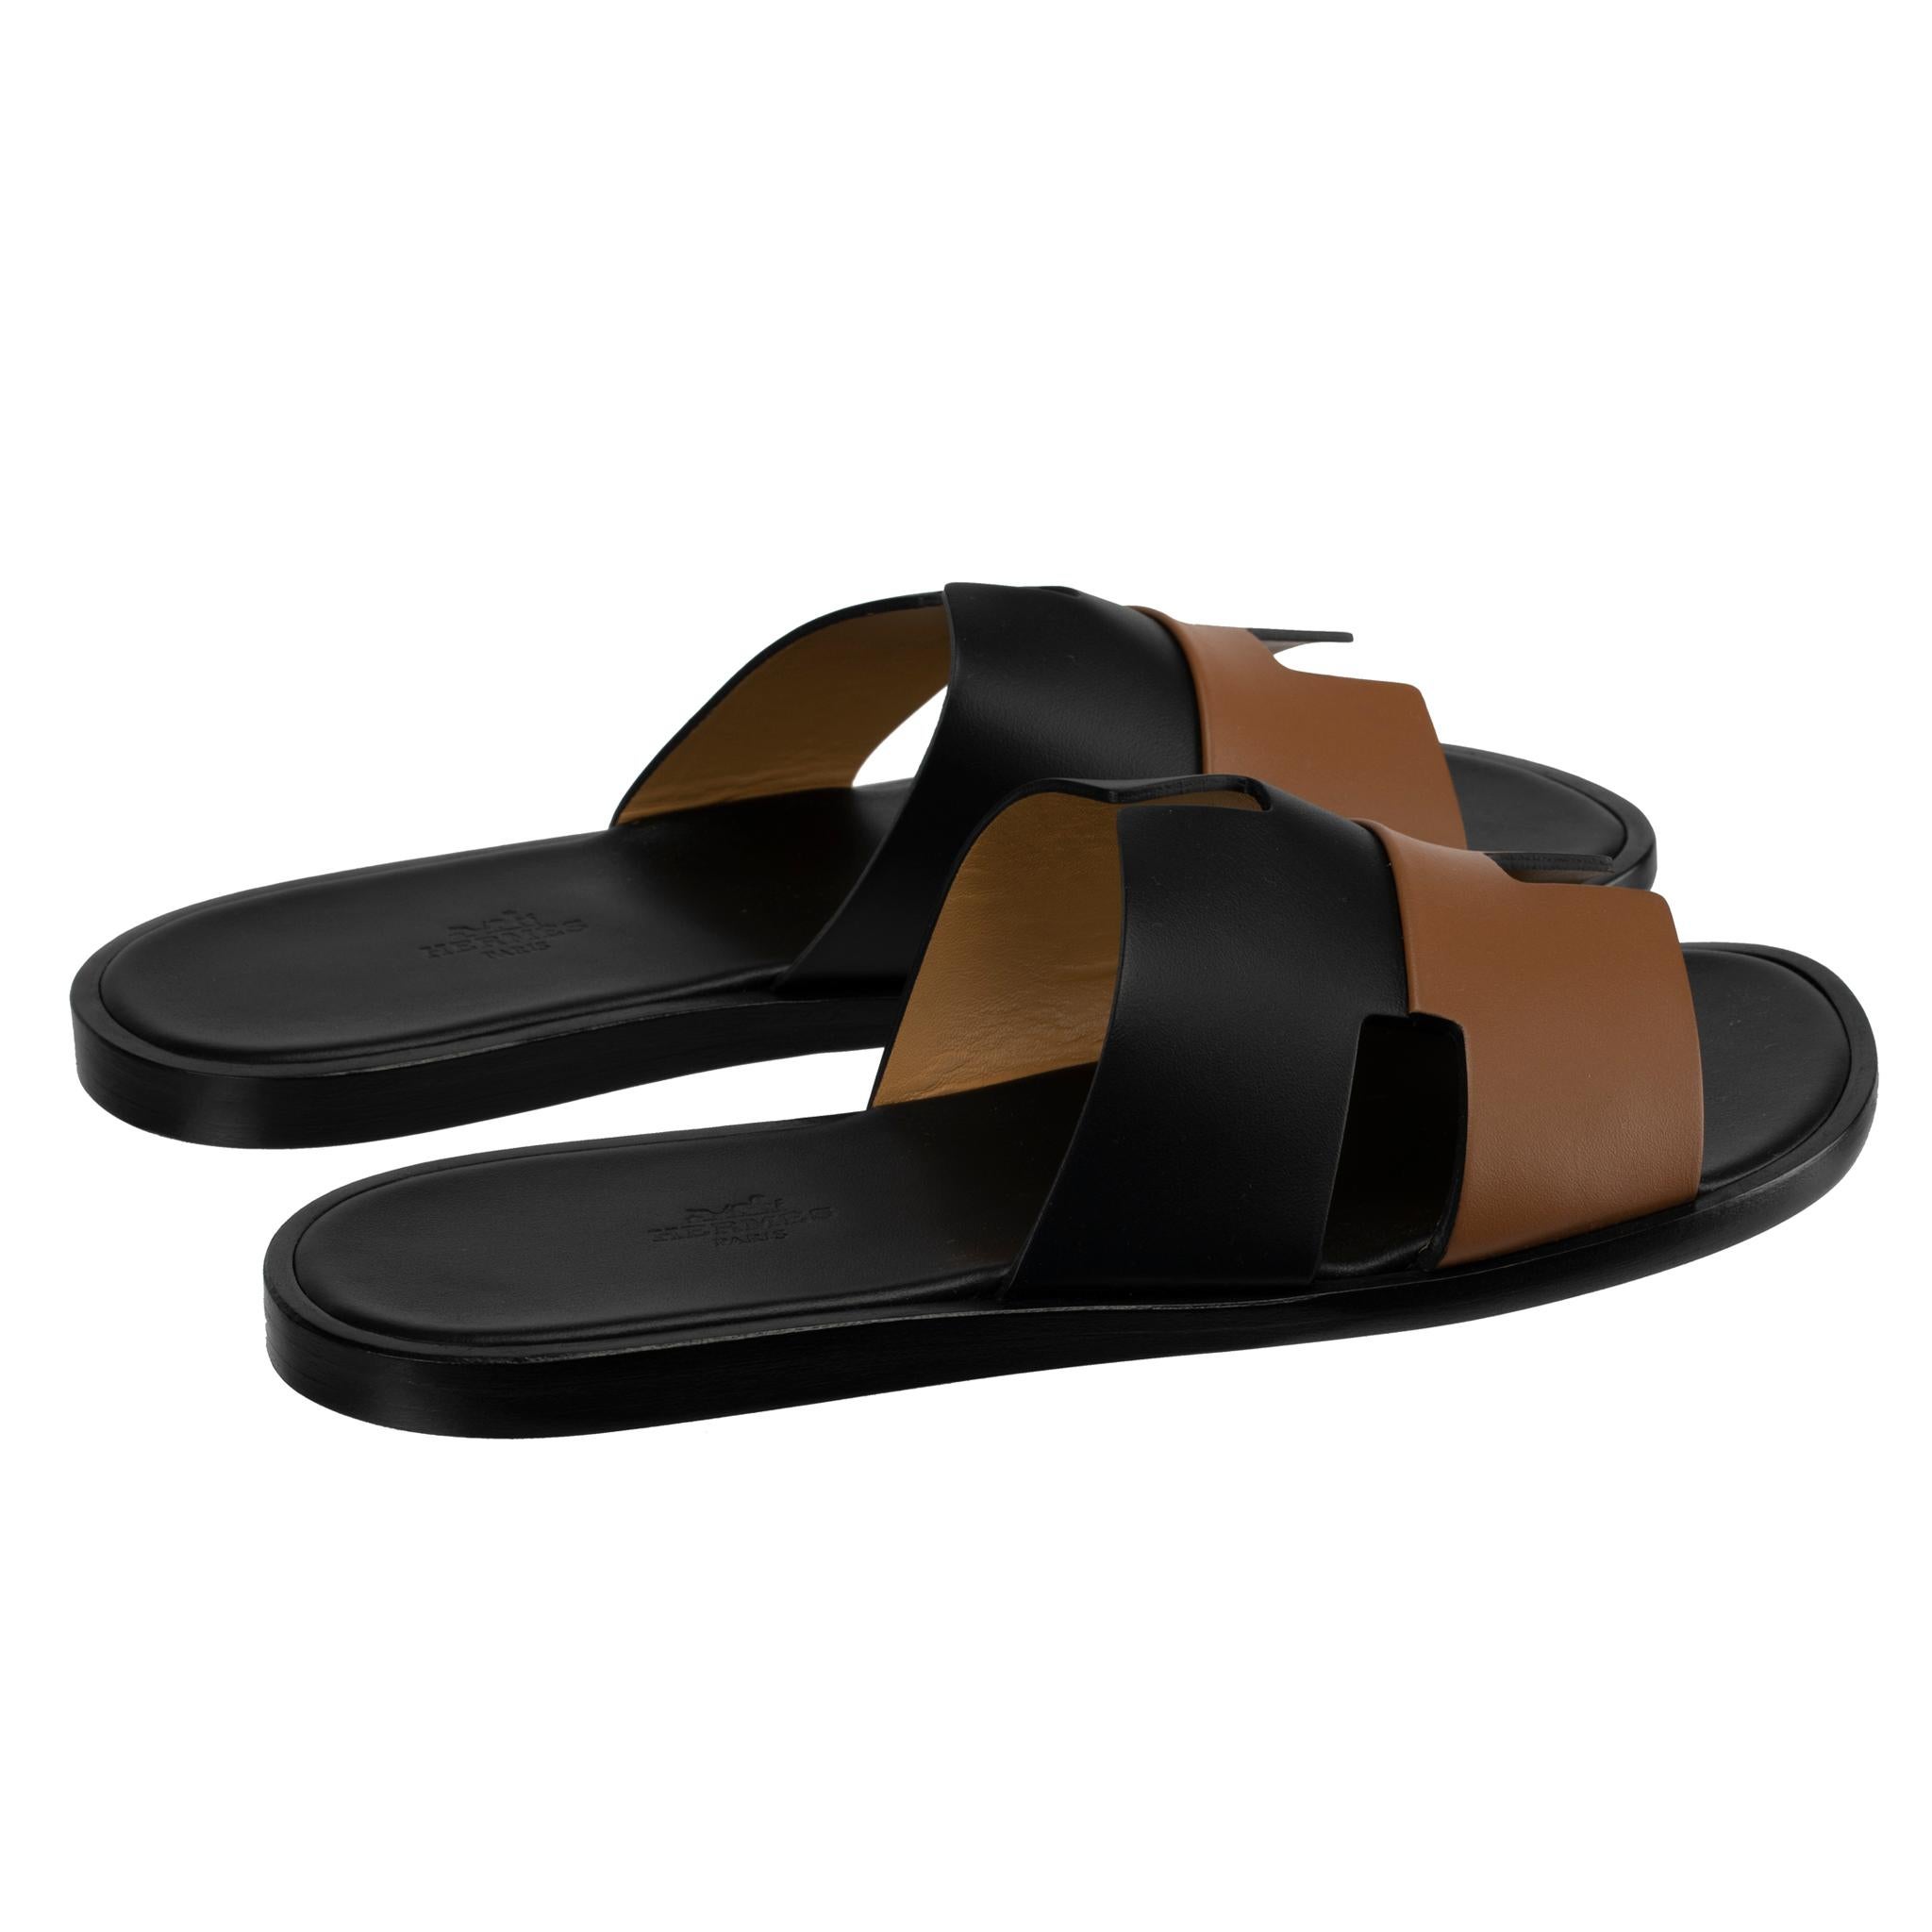 1stdibs Exclusives From Three Over Six

Brand: Hermes
Style: Izmir Sandal
Size: 41 FR
Color: Gold and Black
Leather: Smooth

Condition: Pristine, never used: The item has never been used and is in pristine condition complete with all